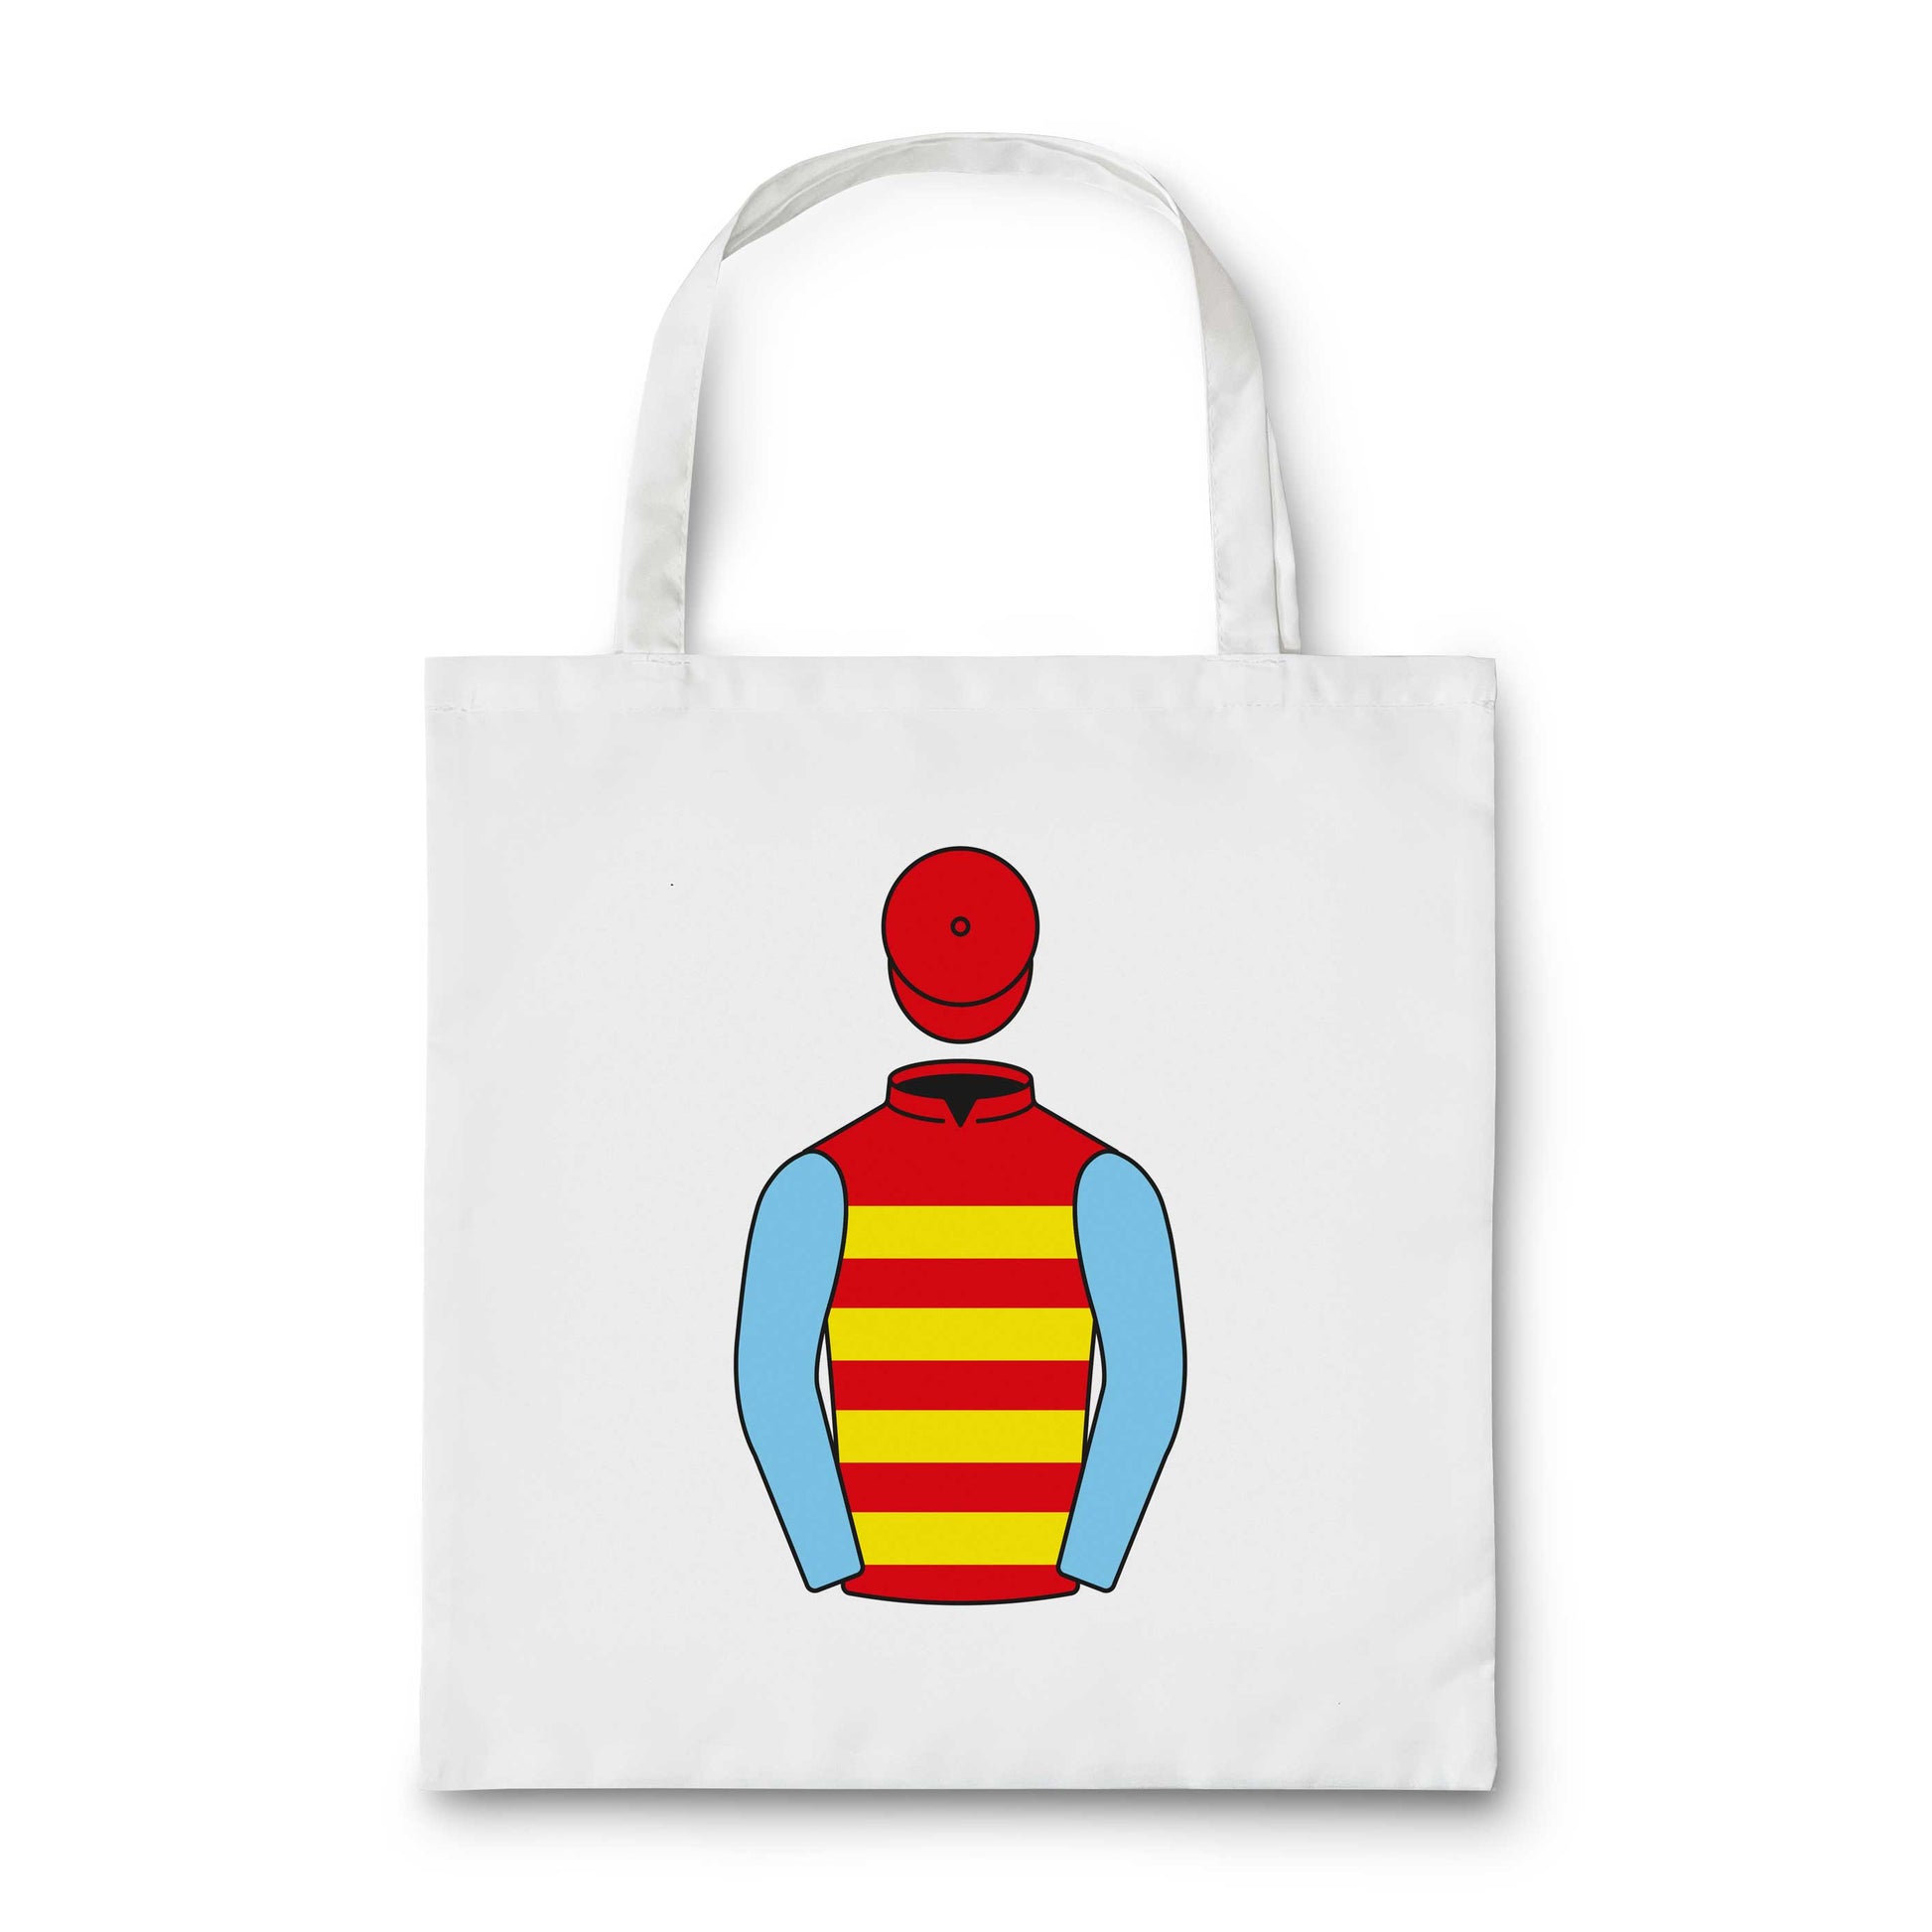 Anthony Knott Tote Bag - Tote Bag - Hacked Up